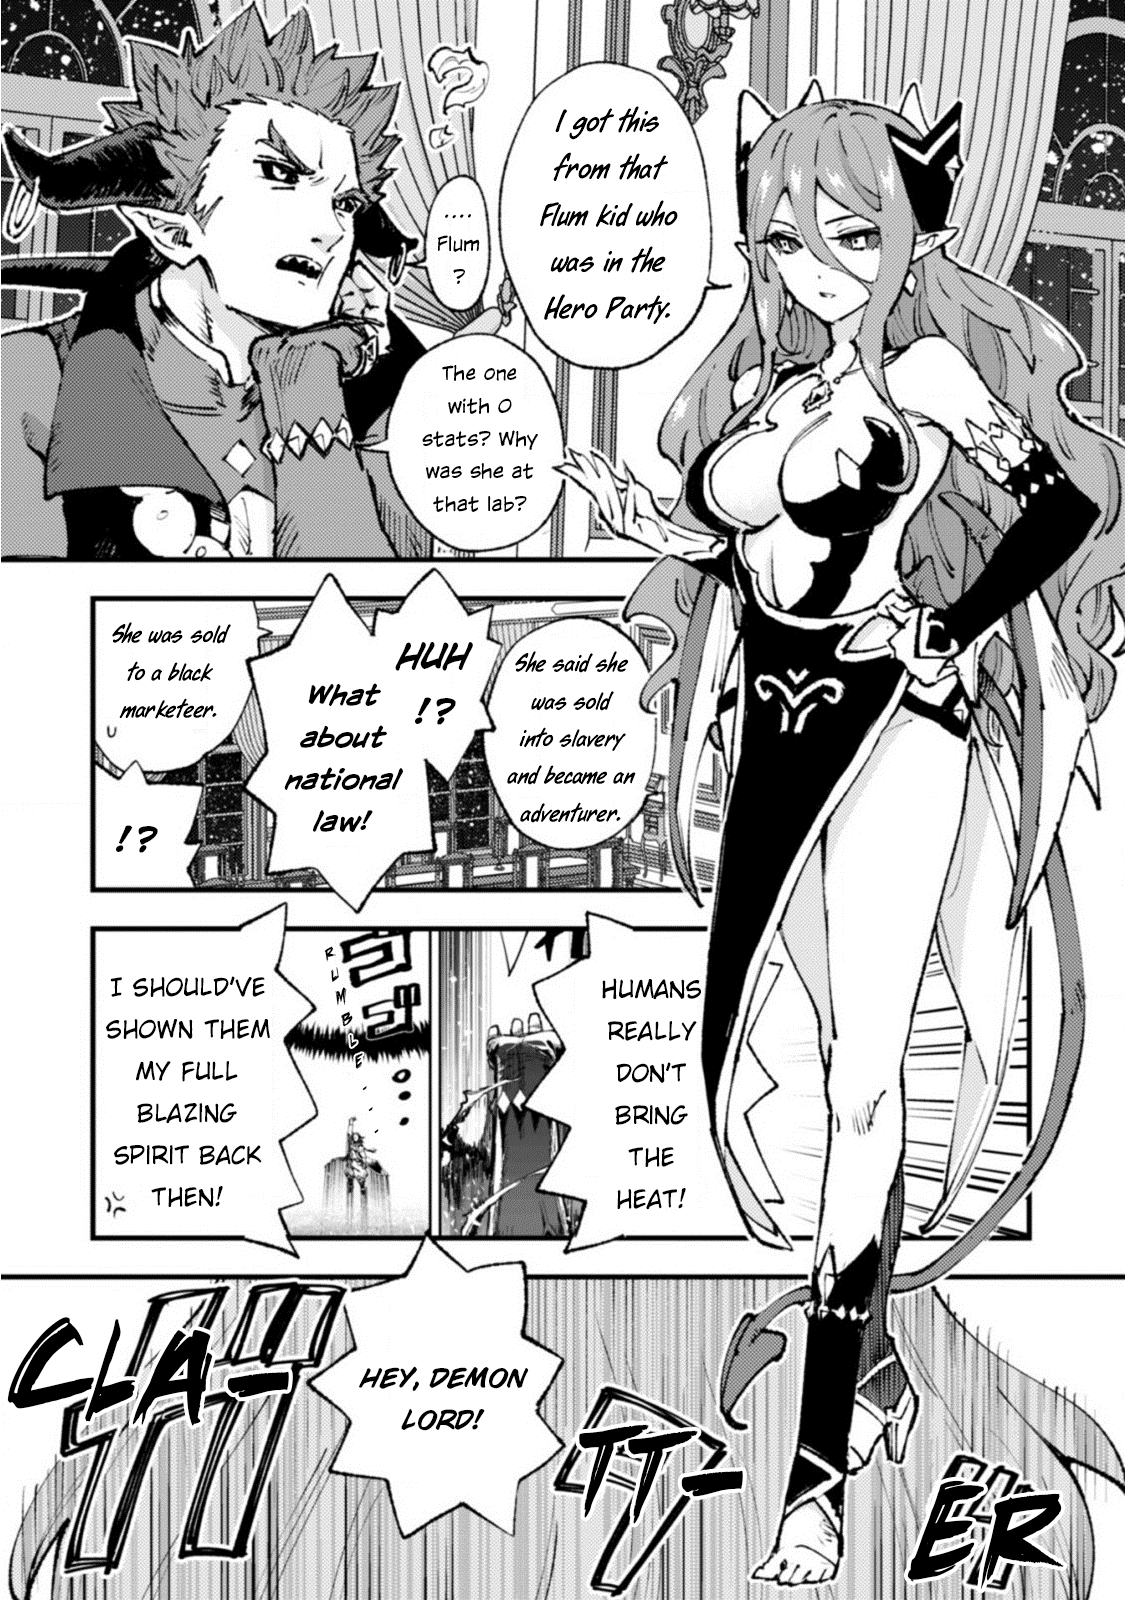 Do You Think Someone Like You Could Defeat The Demon Lord? - Page 2